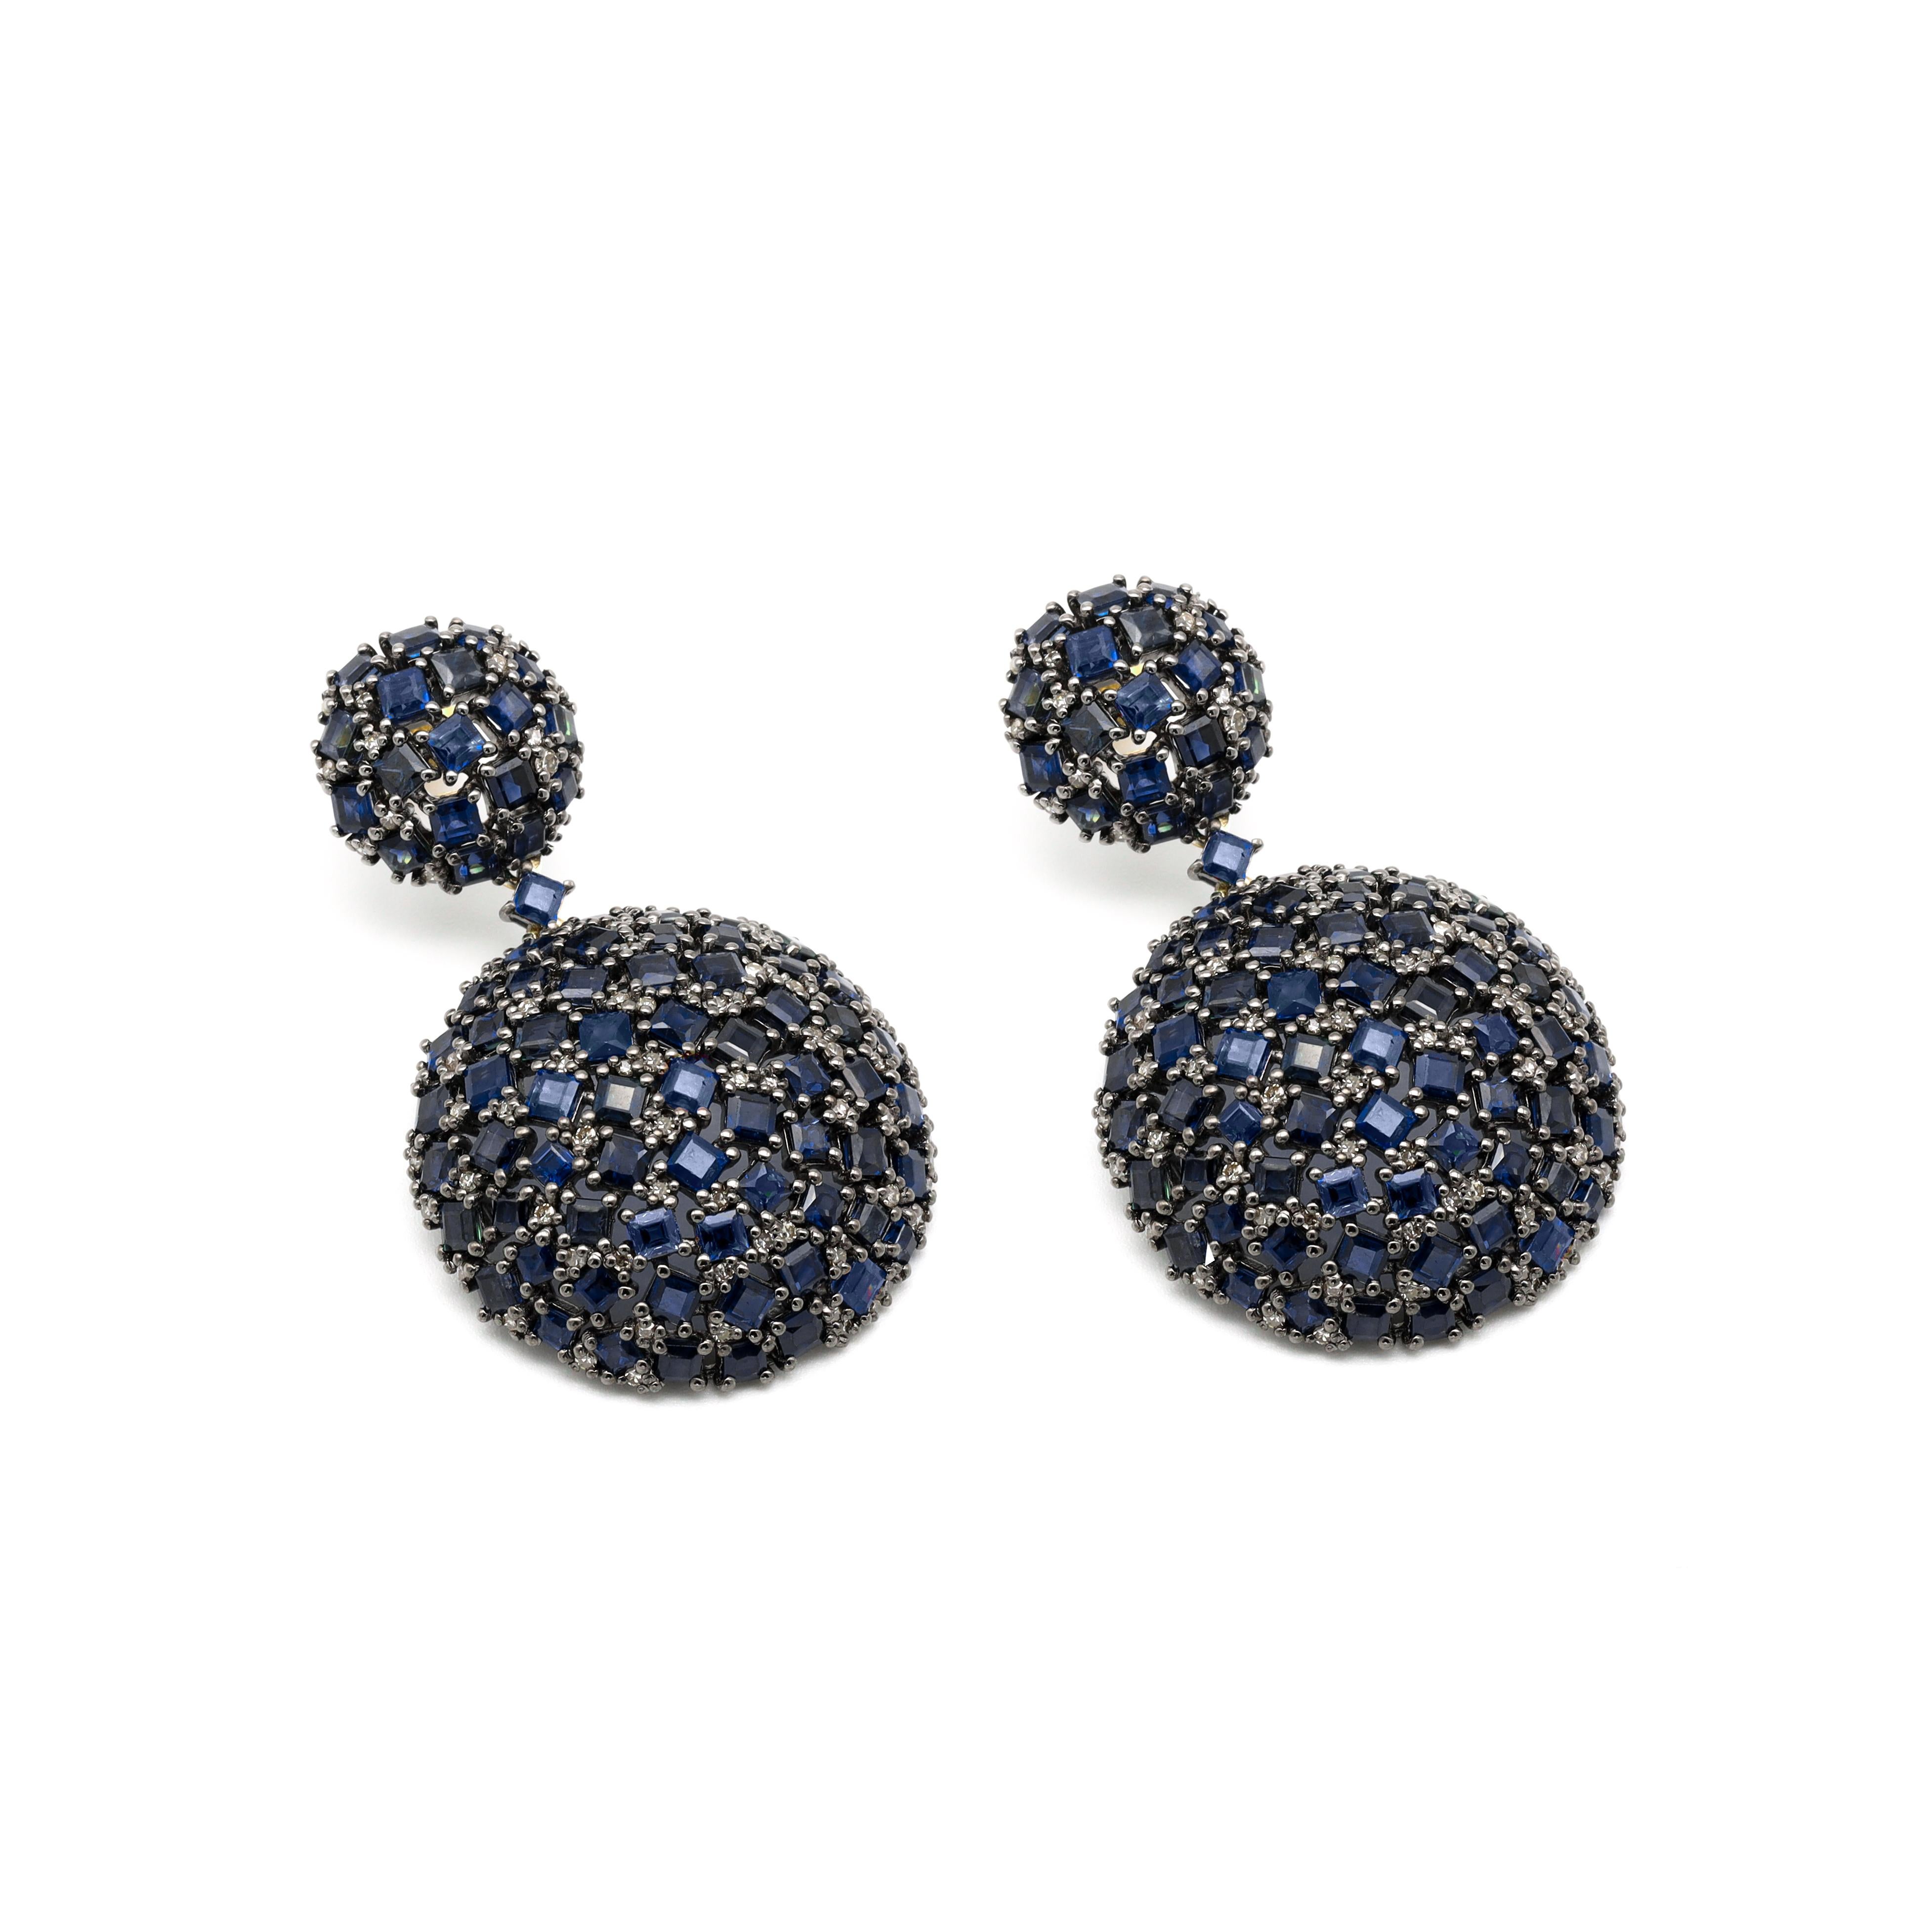 25.63 Carat Sapphire and Diamond Cocktail Drop Earrings in Art-Deco Style

This Victorian-era art-deco style exquisite prussian blue sapphire and diamond semi-circle style earring is impressive. The mixed-size collection of square-cut sapphires are